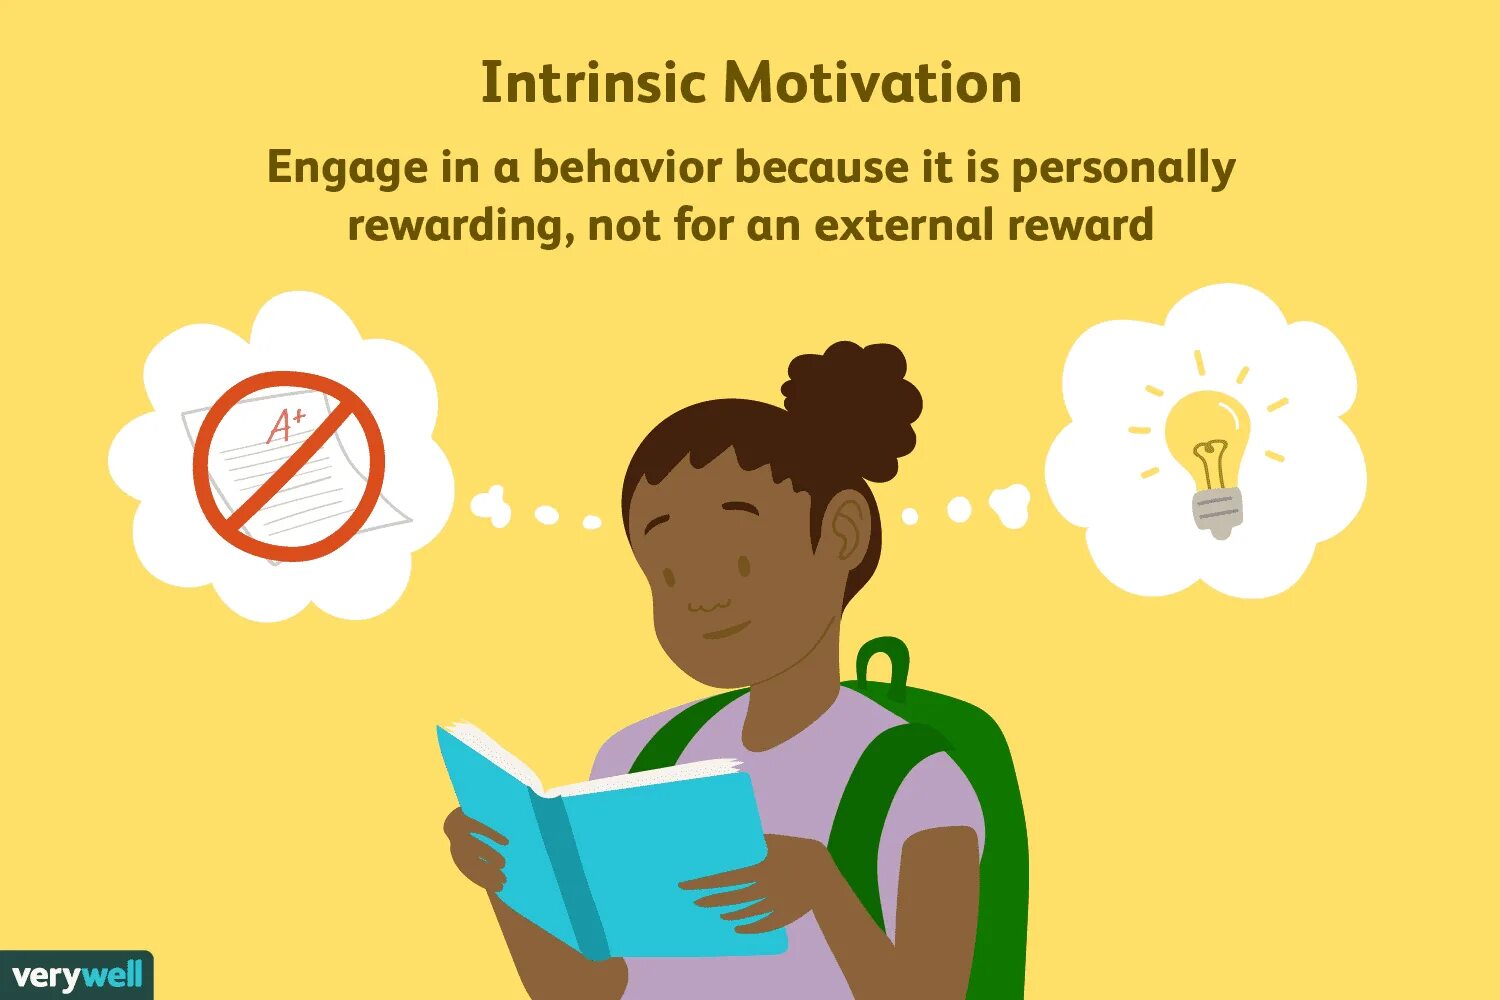 Motivated learning. Intrinsic Motivation. Intrinsic Motivation and extrinsic Motivation. External Motivation. Types of extrinsic Motivation.